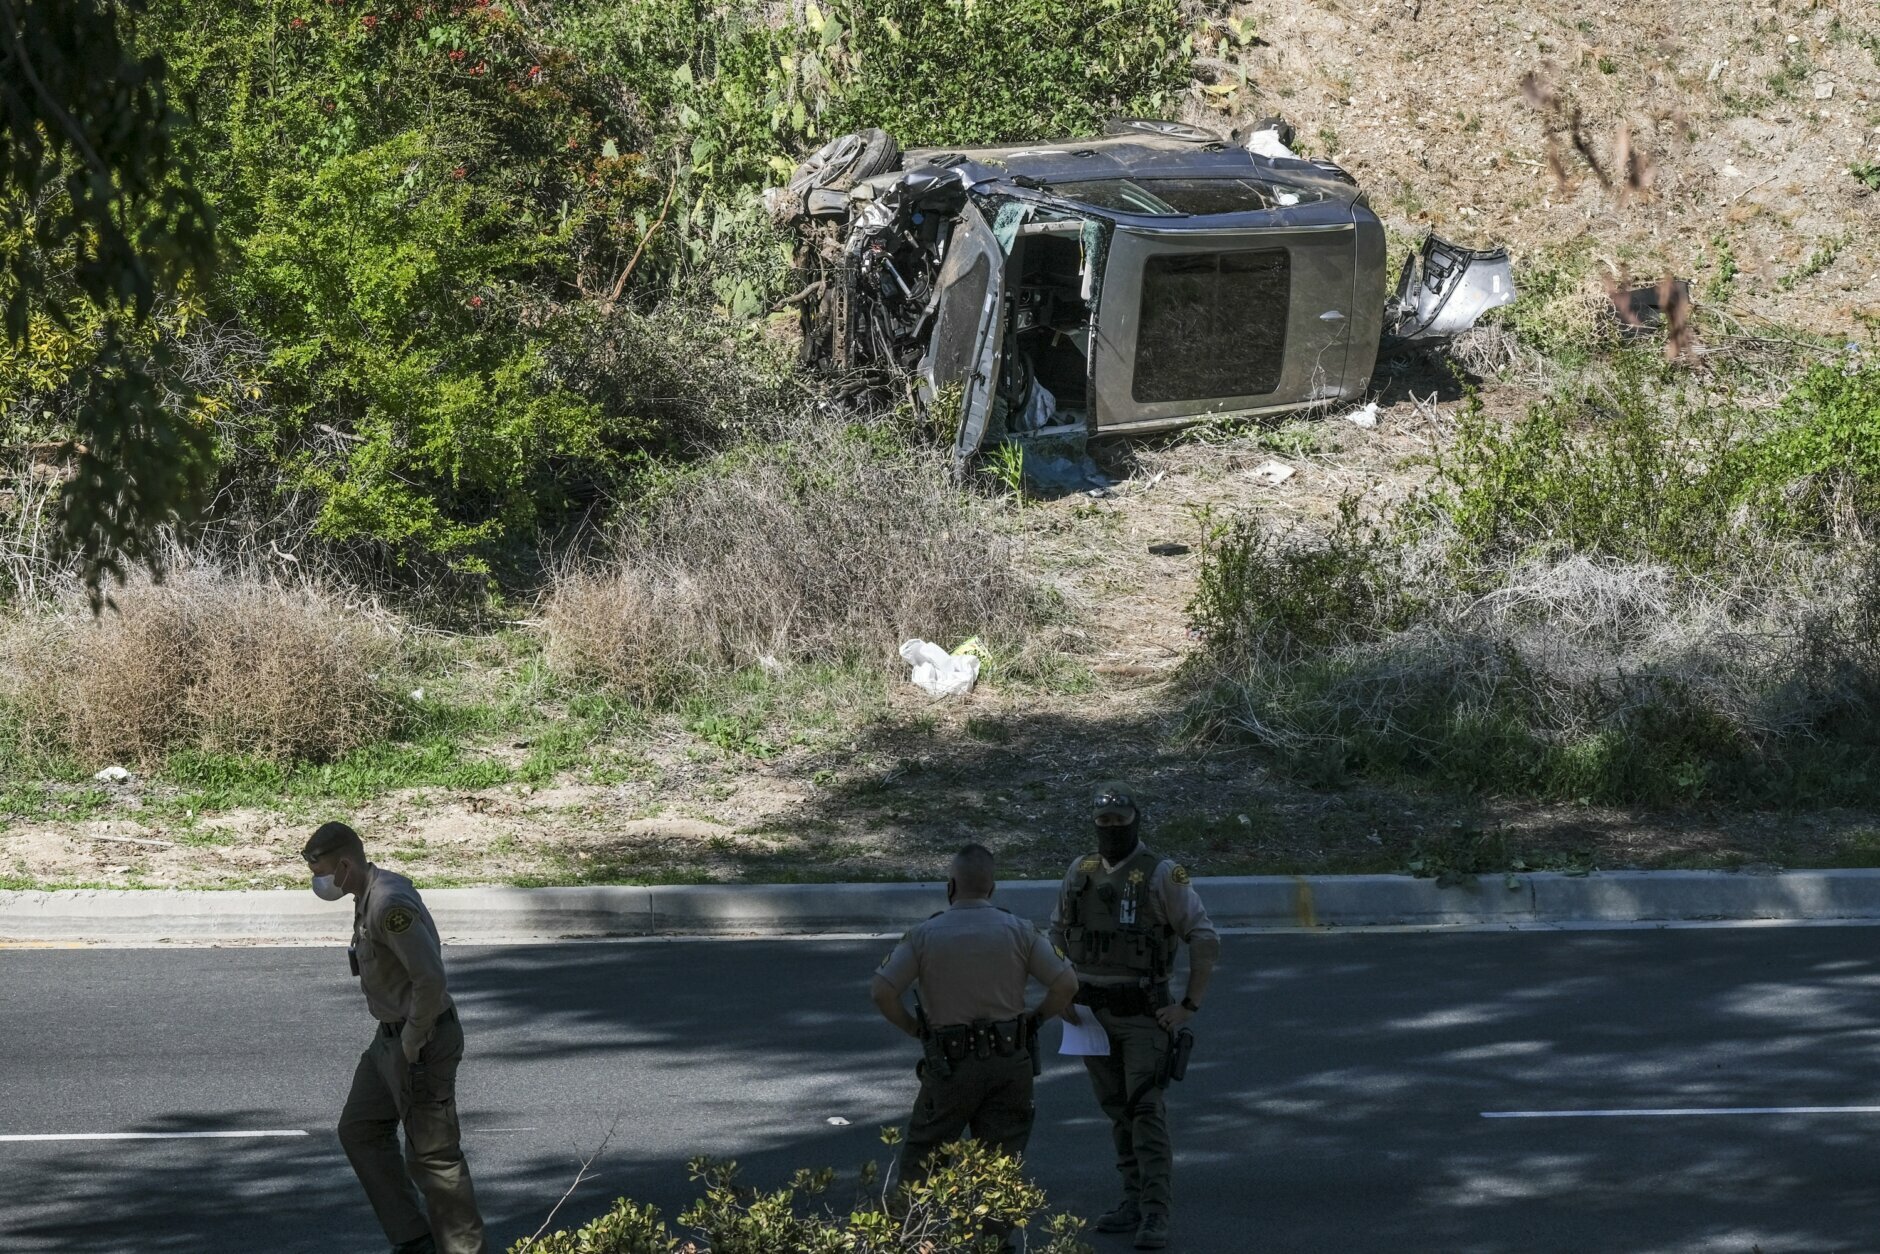 A vehicle rests on its side after a rollover accident involving golfer Tiger Woods along a road in the Rancho Palos Verdes suburb of Los Angeles on Tuesday, Feb. 23, 2021. Woods suffered leg injuries in the one-car accident and was undergoing surgery, authorities and his manager said. (AP Photo/Ringo H.W. Chiu)